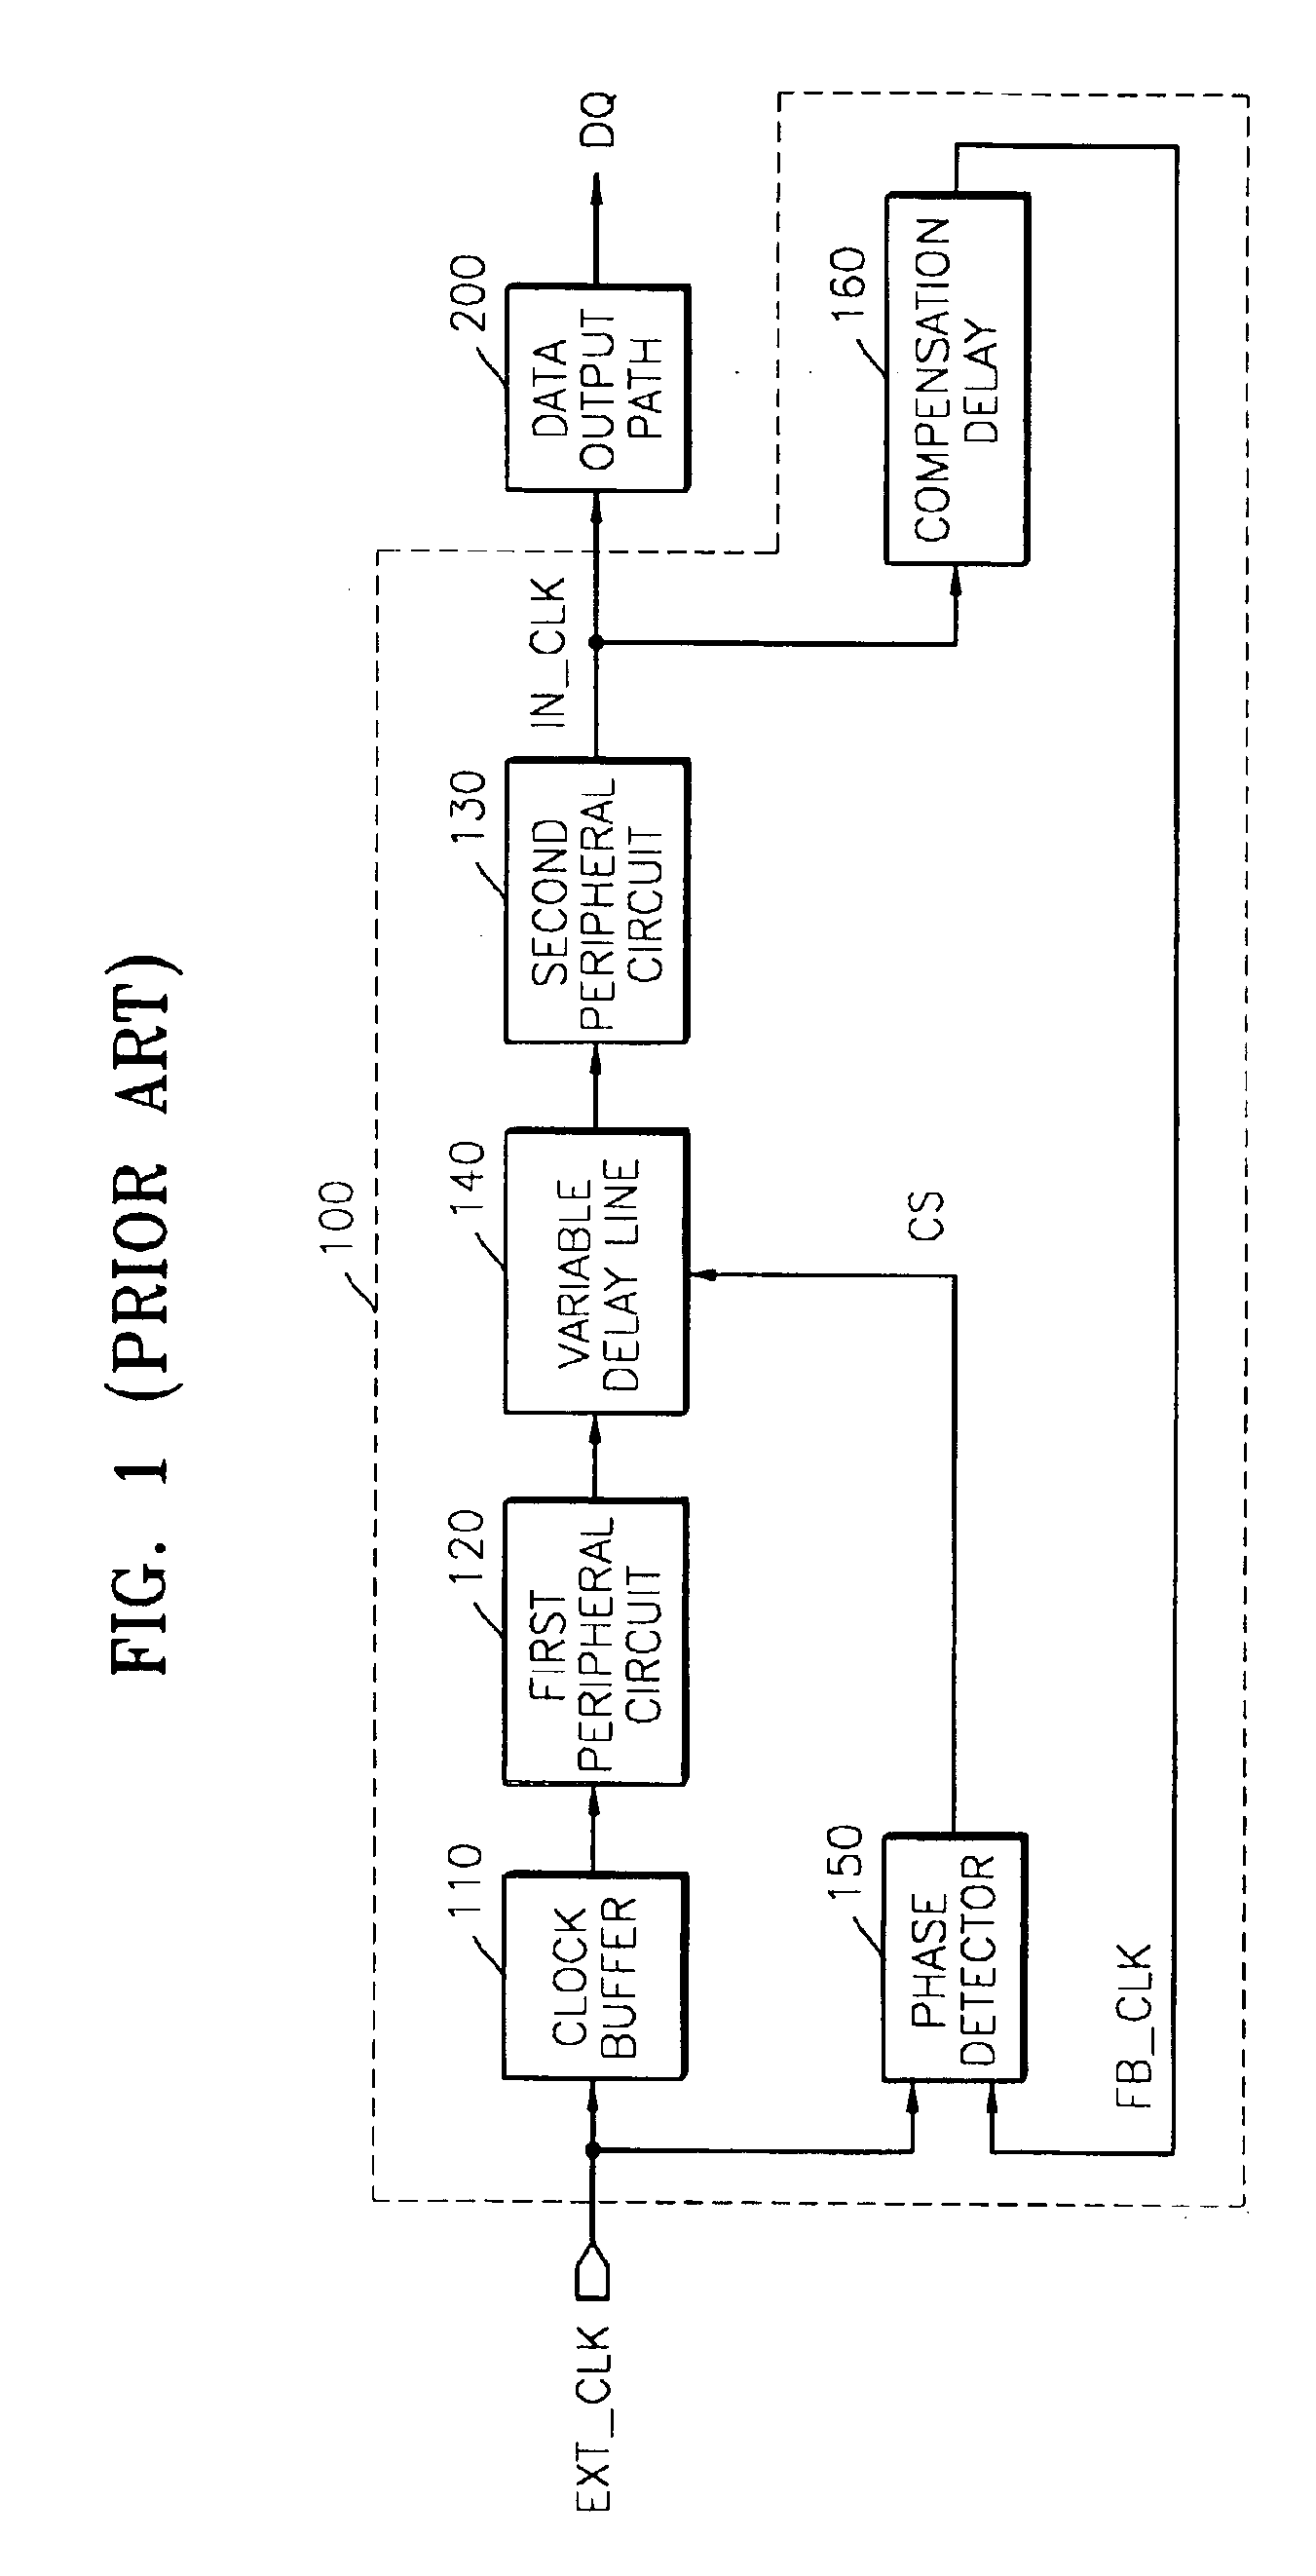 Memory devices having power supply routing for delay locked loops that counteracts power noise effects